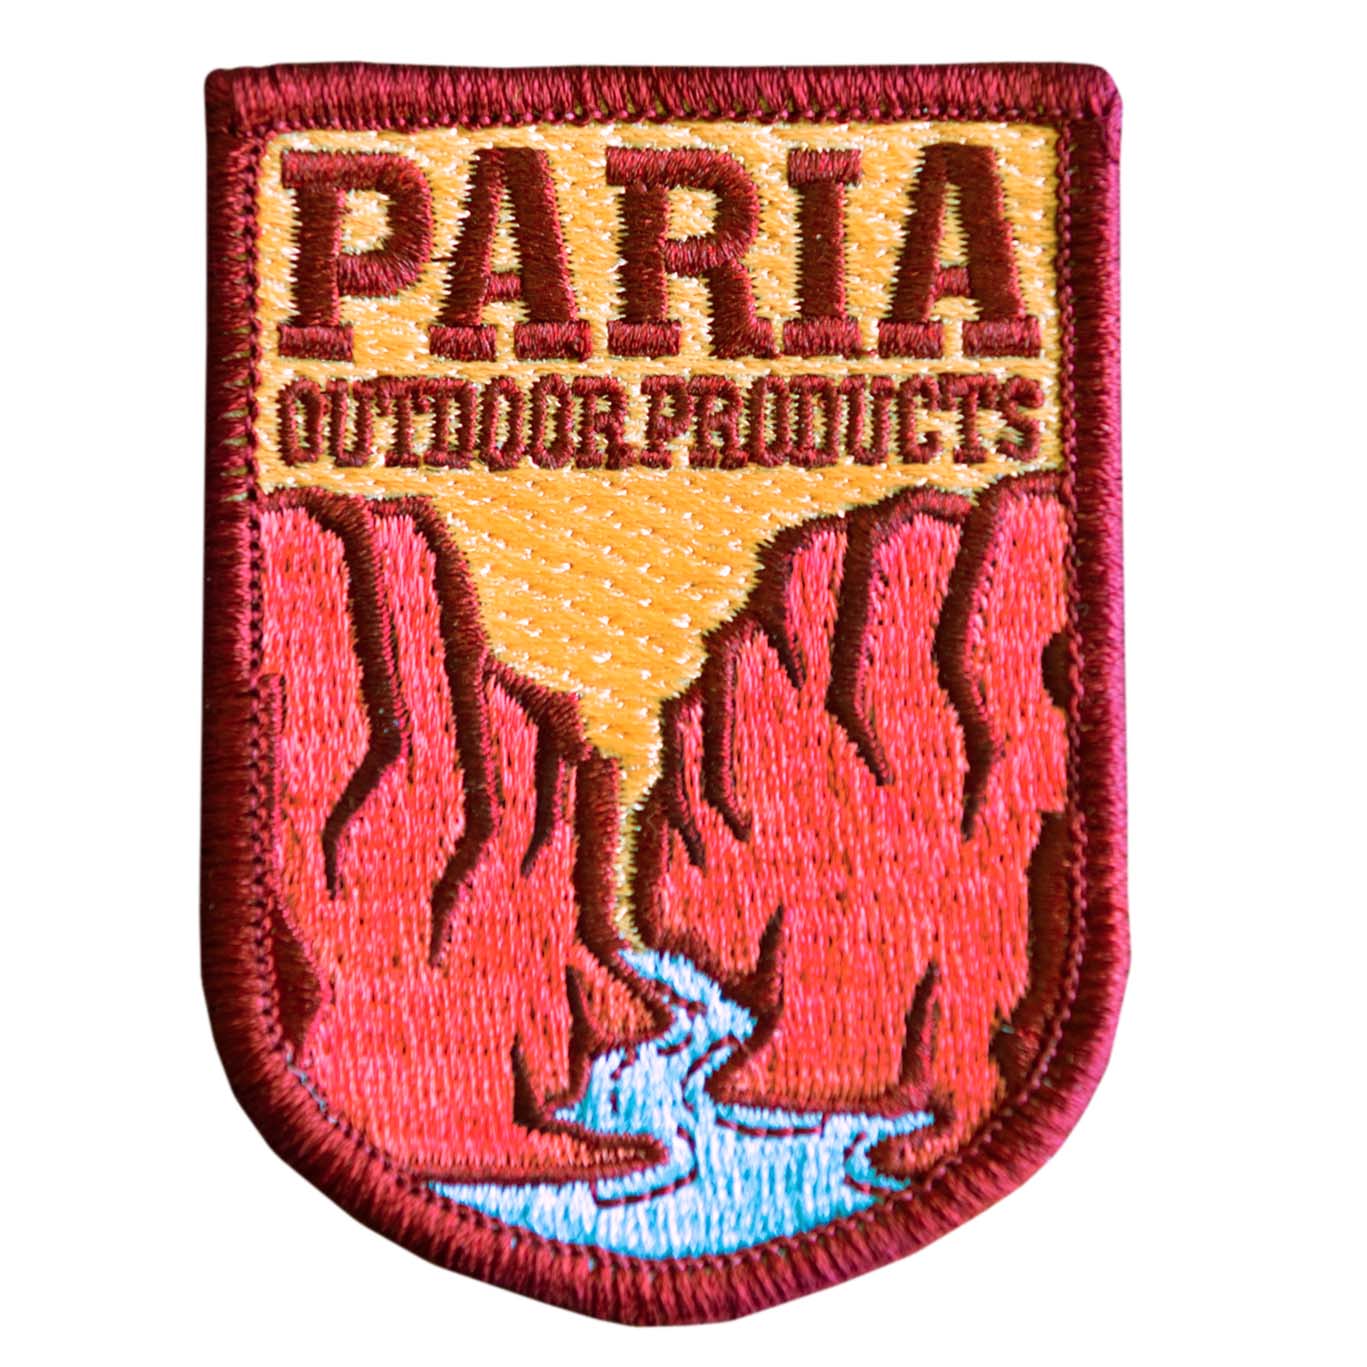 Paria Outdoor Products Logo Patches